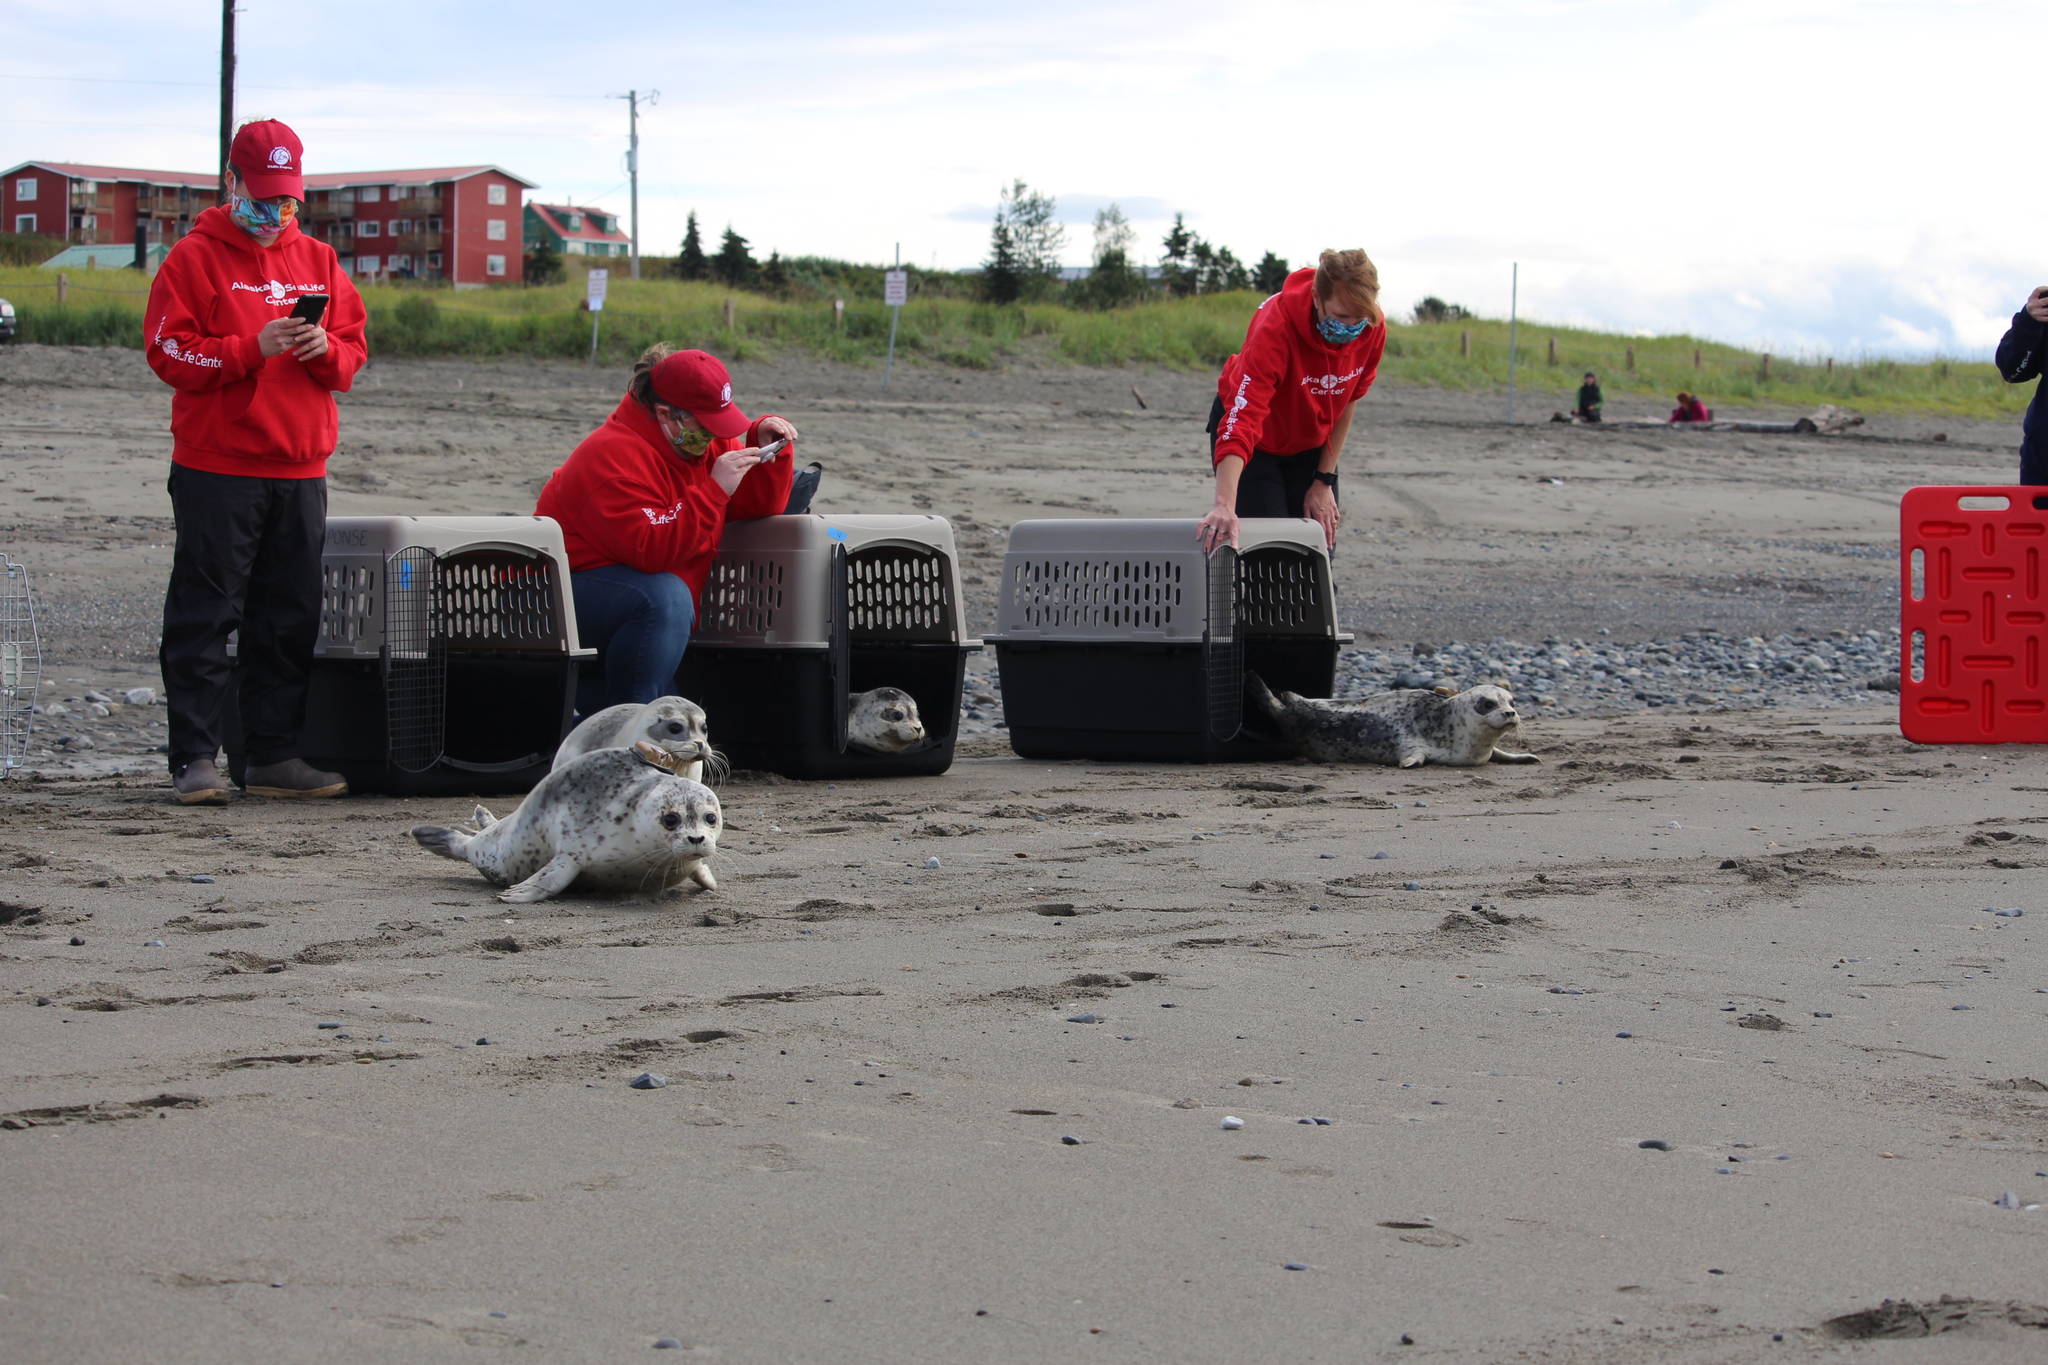 Staff from the Alaska SeaLife Center release five Harbor Seals into Cook Inlet at the Kenai Beach on Aug. 27, 2020. (Photo by Brian Mazurek/Peninsula Clarion)